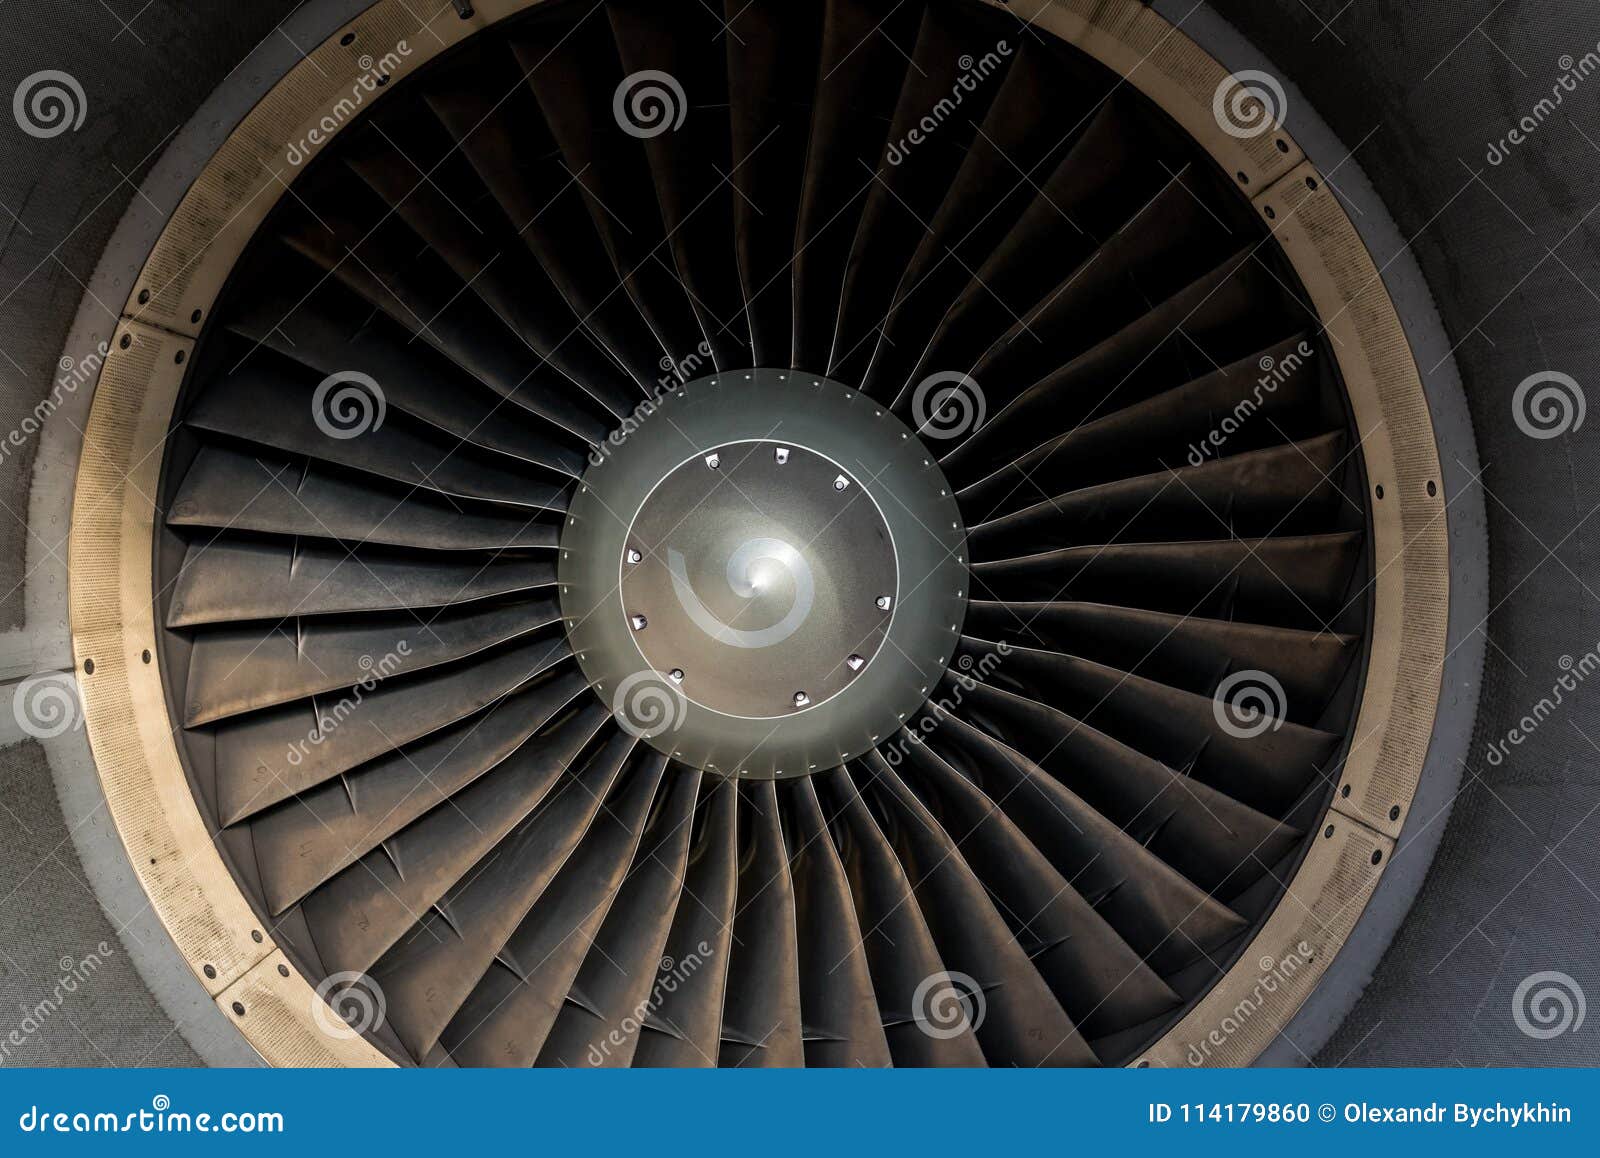 blades of an aircraft engine close-up. travel and aerospace concept